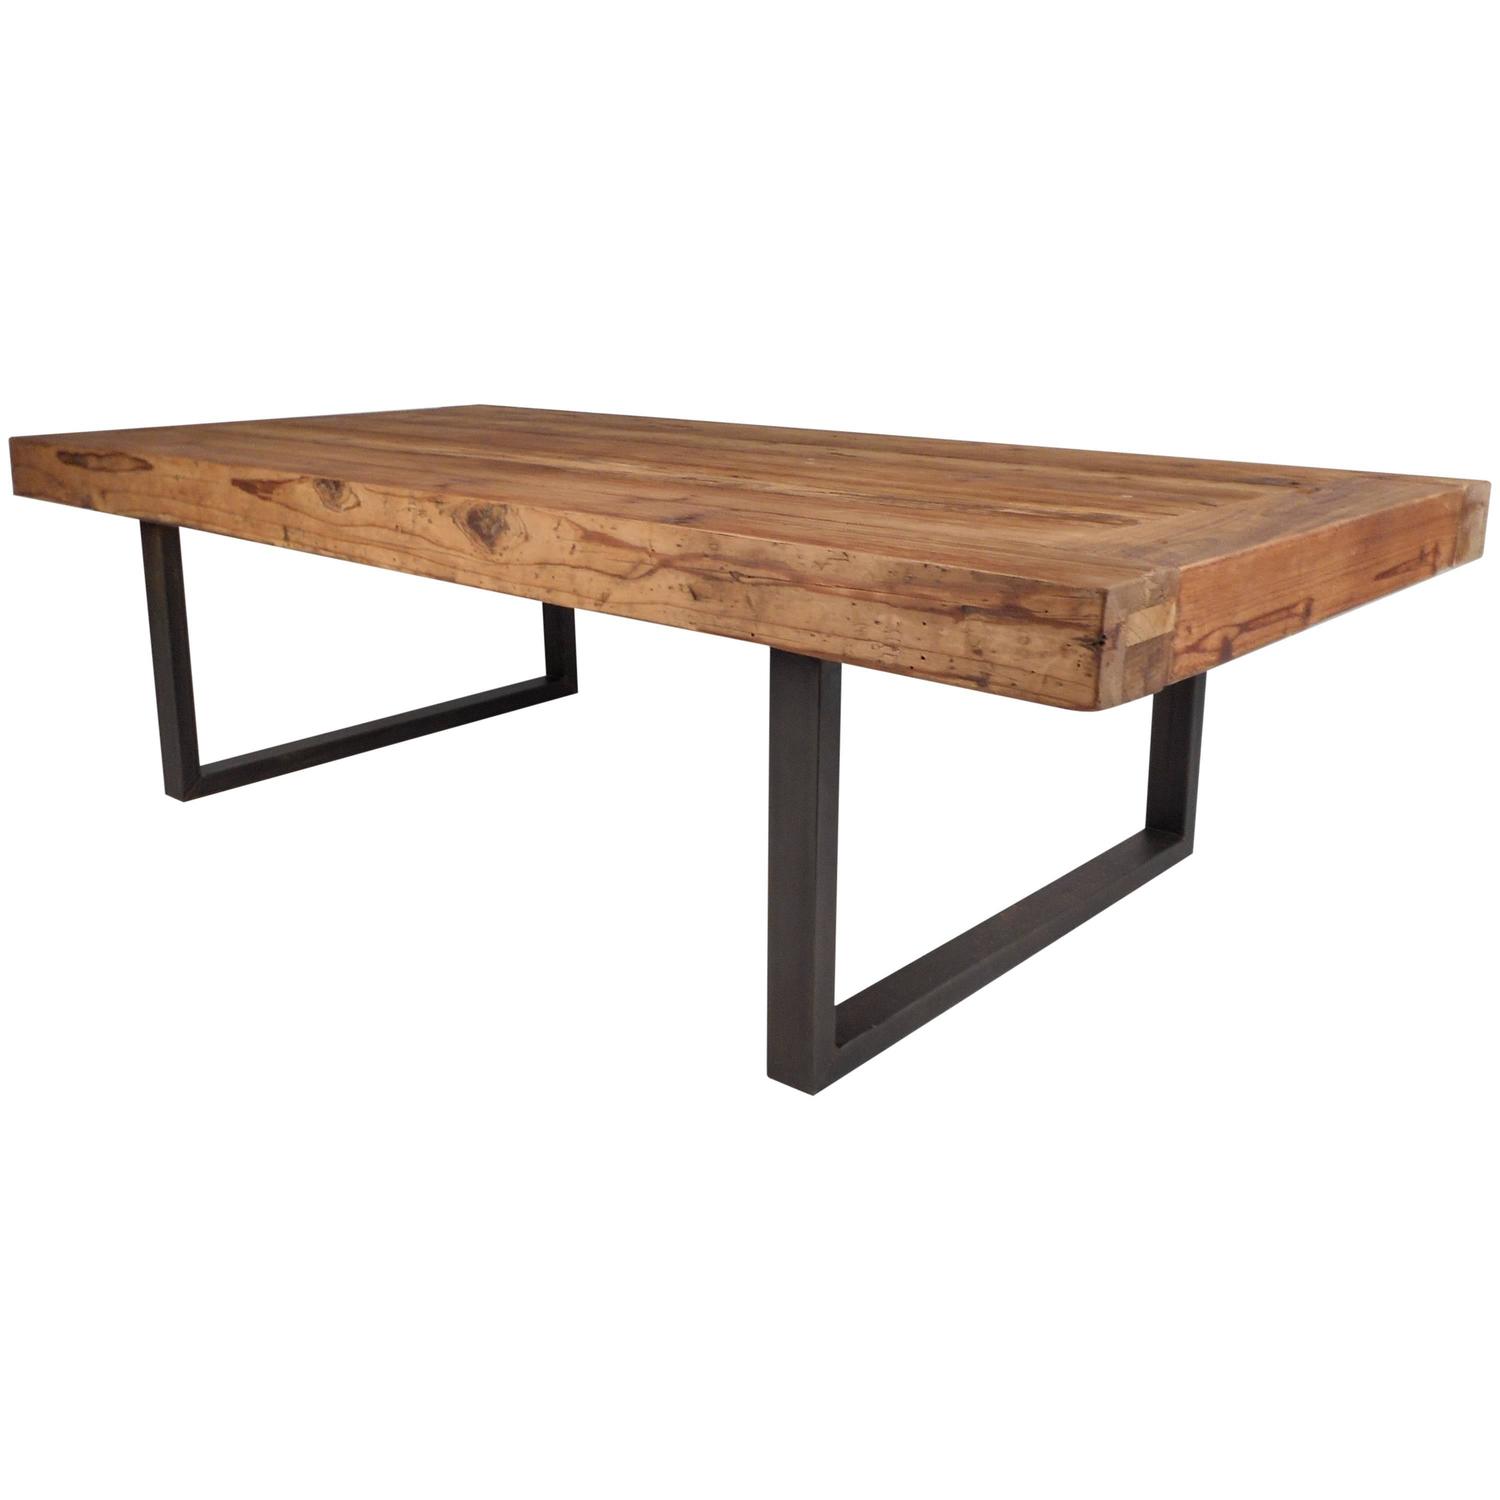 Mid-Century Modern Style Industrial Work Table For Sale at 1stdibs